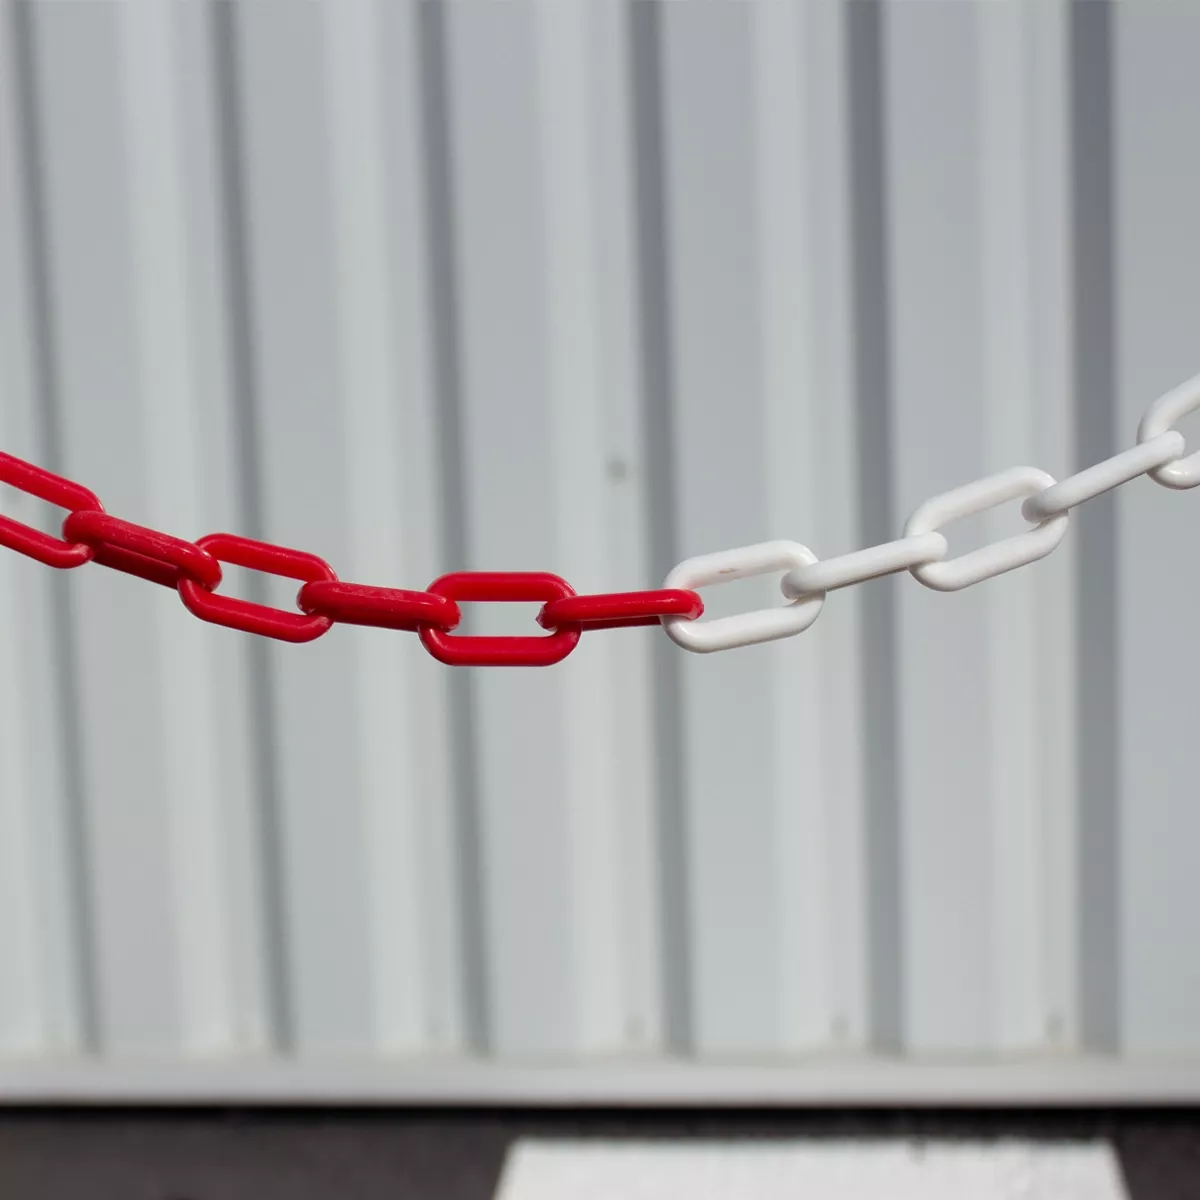 RED_WHITE_CHAIN_IMAGE